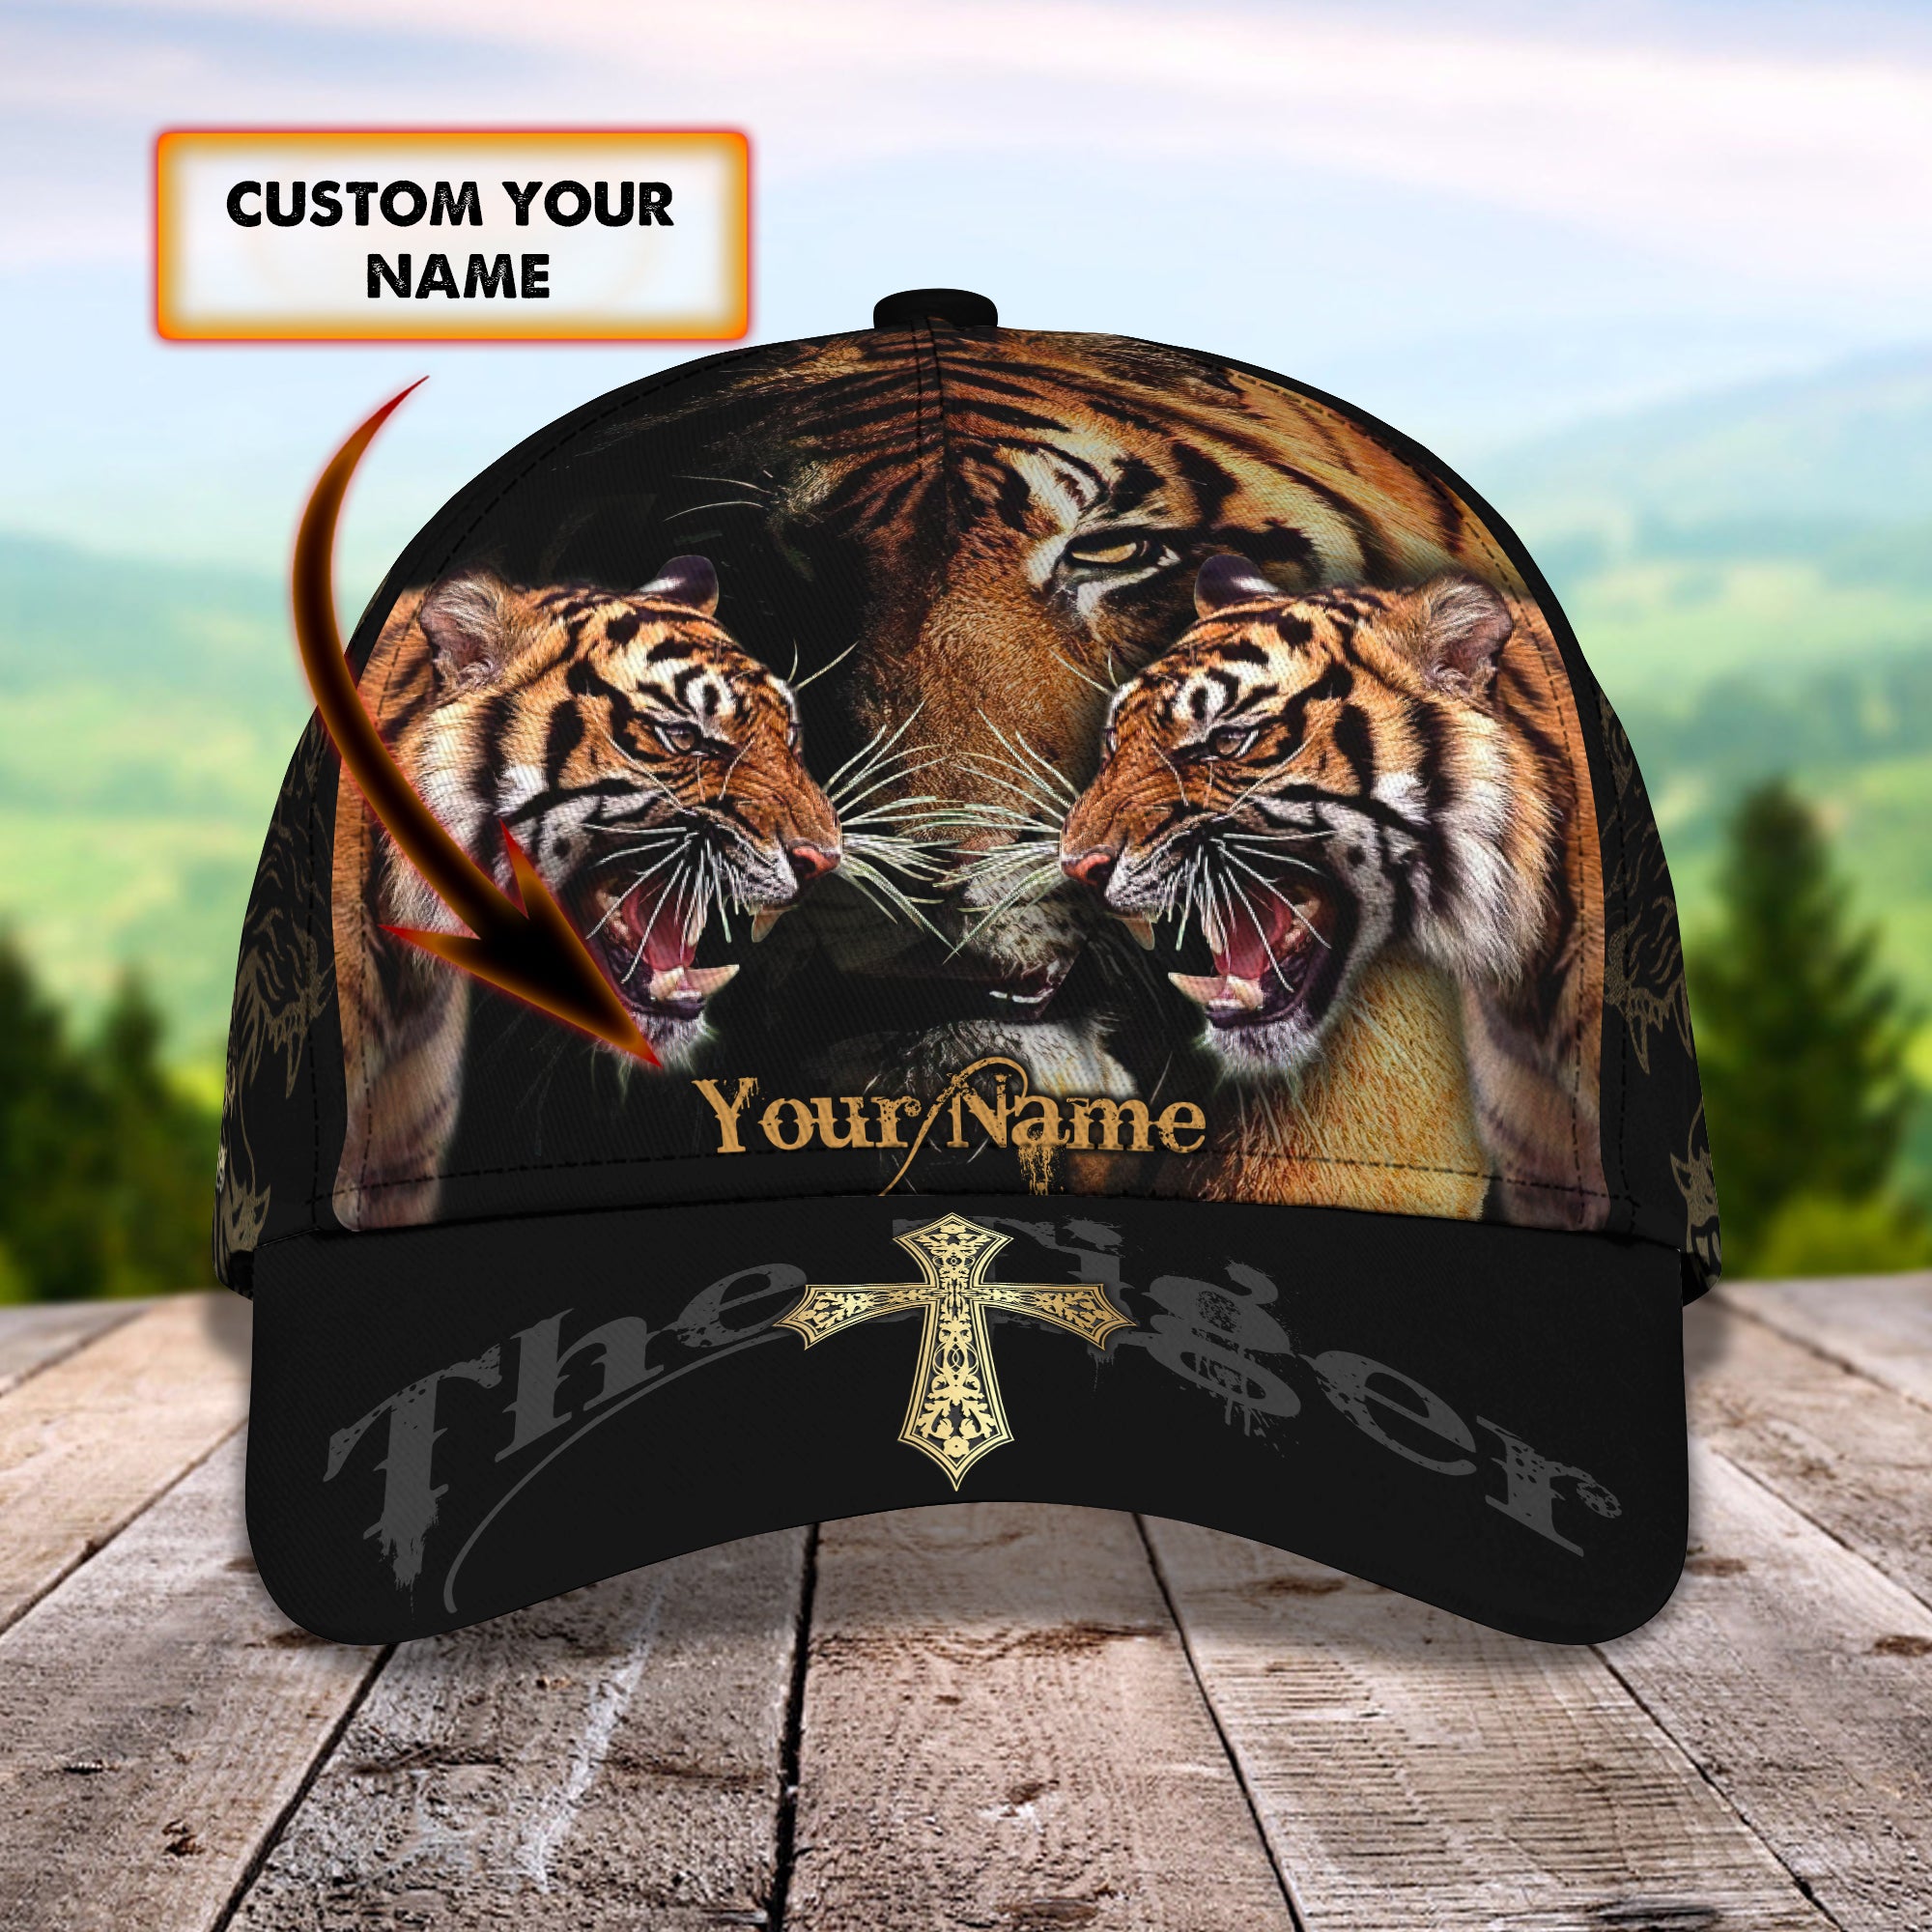 Tiger - Personalized Name Cap For Tiger Lover 16 - Lta98 16